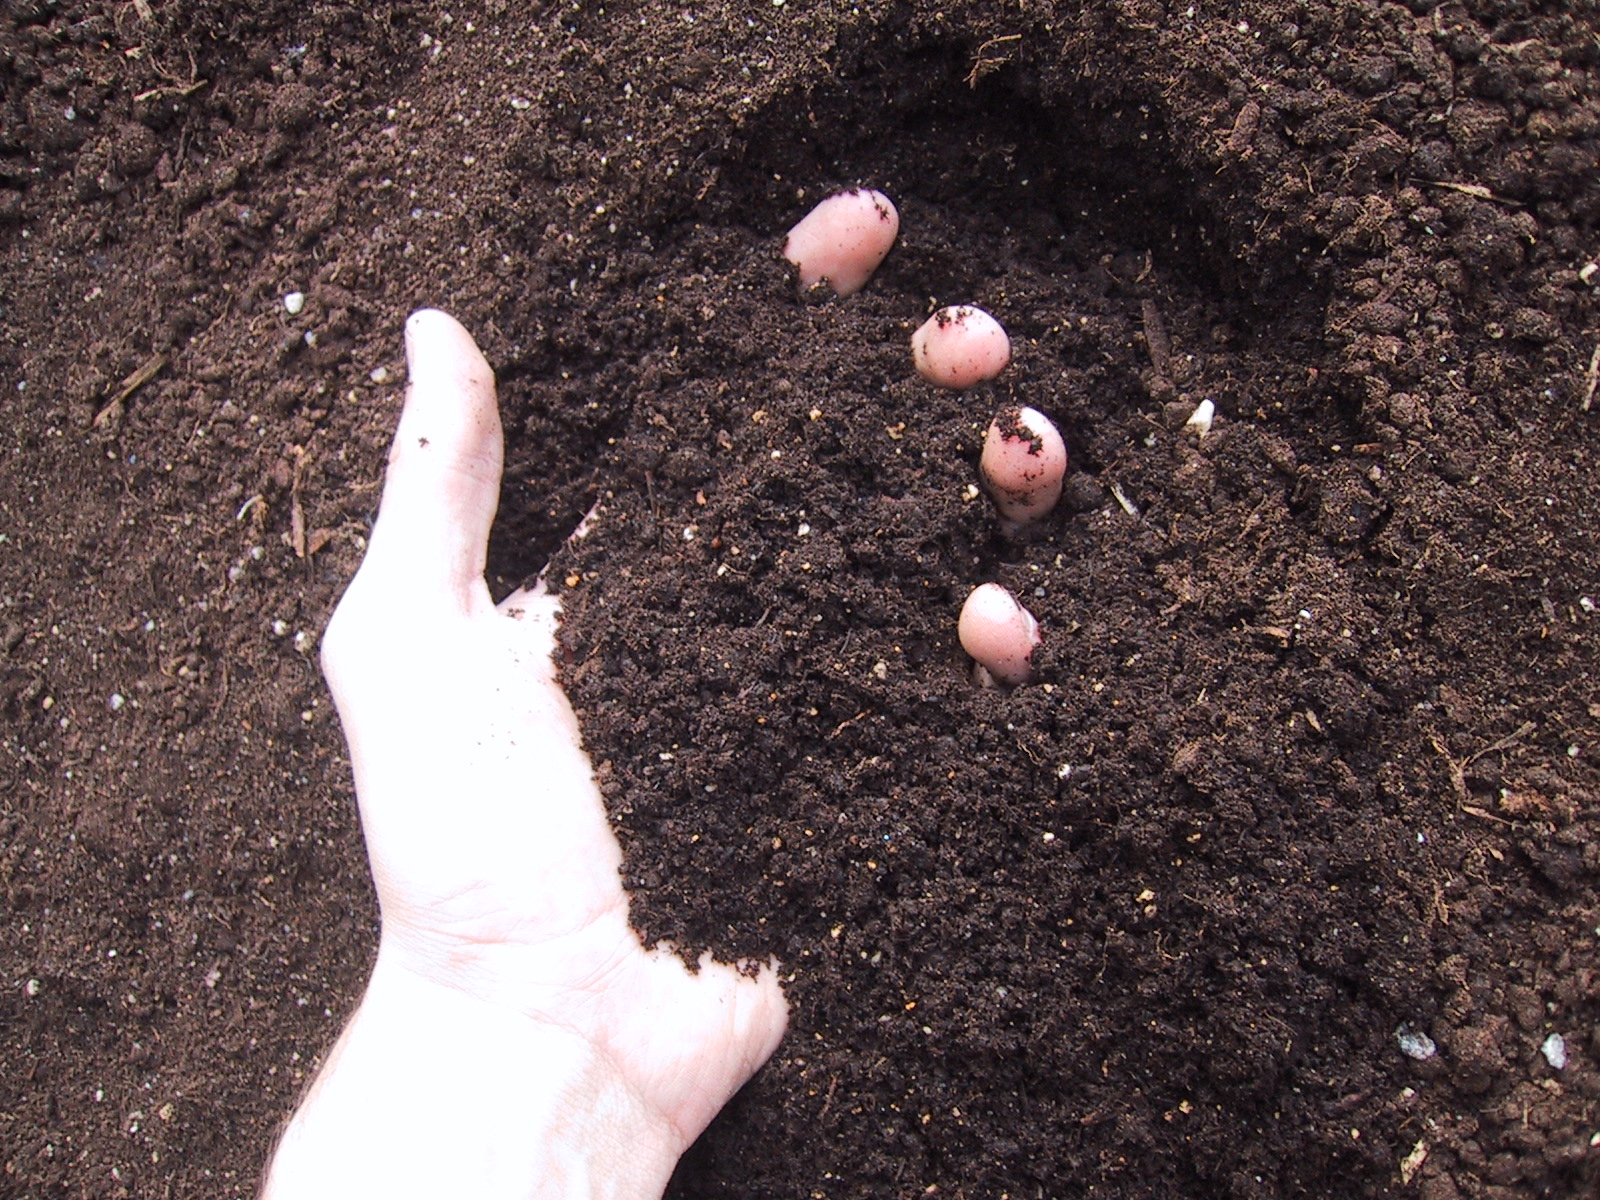 A hand picking up some soil or compost